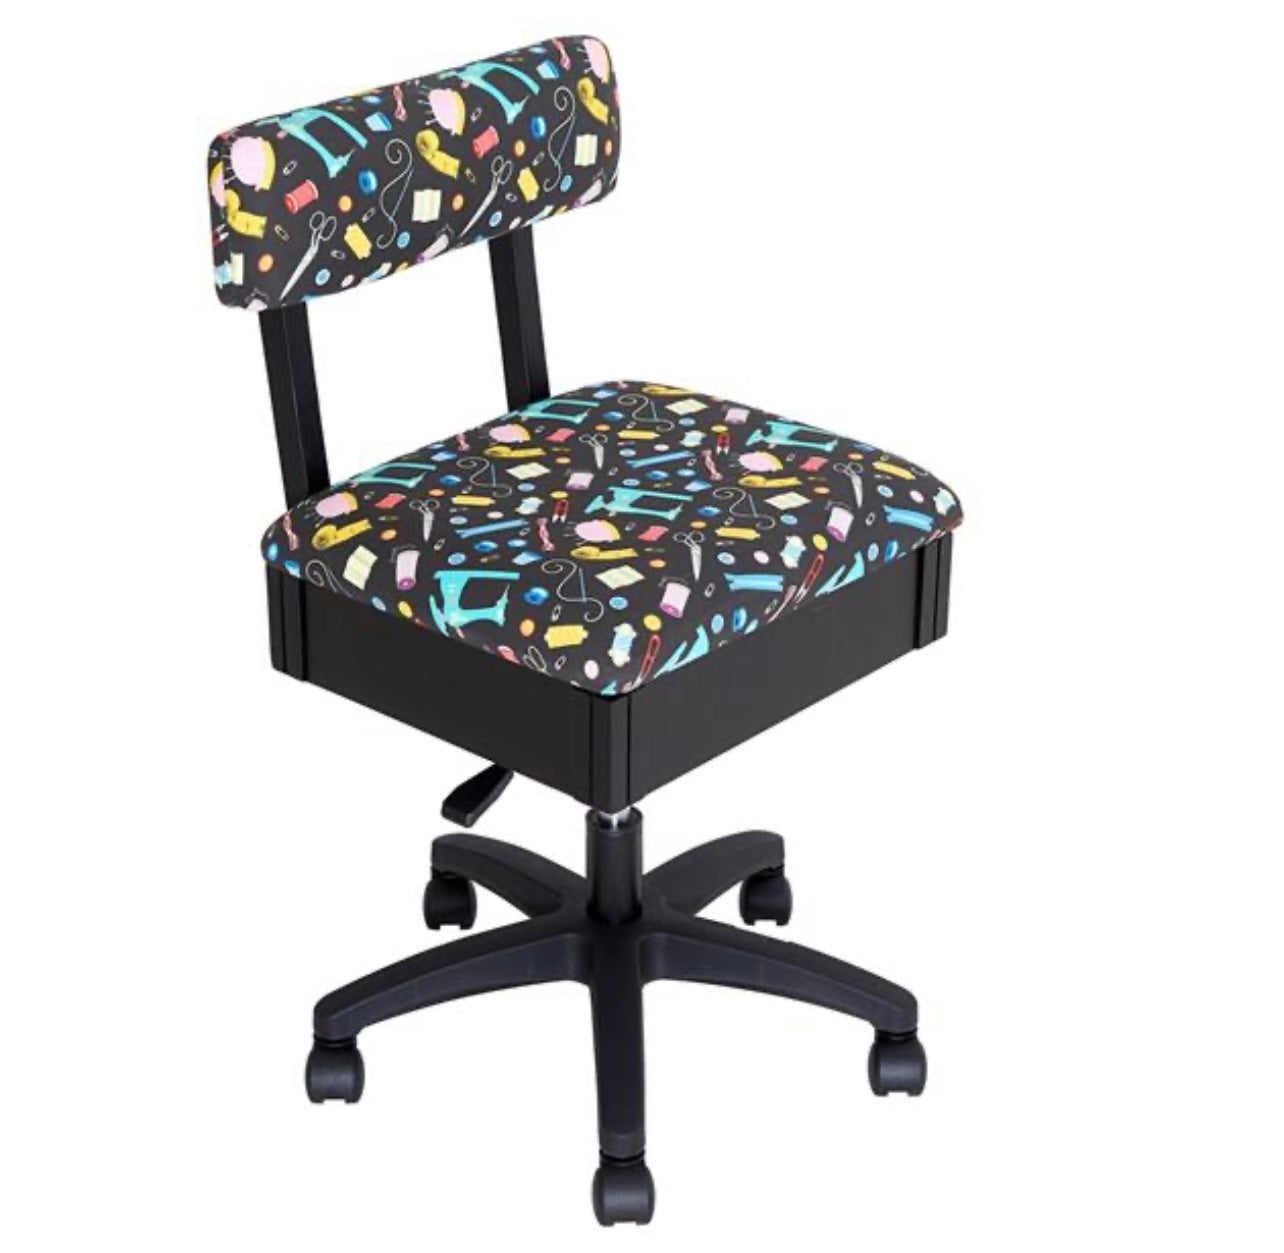 Sewing Chair - Fluoro